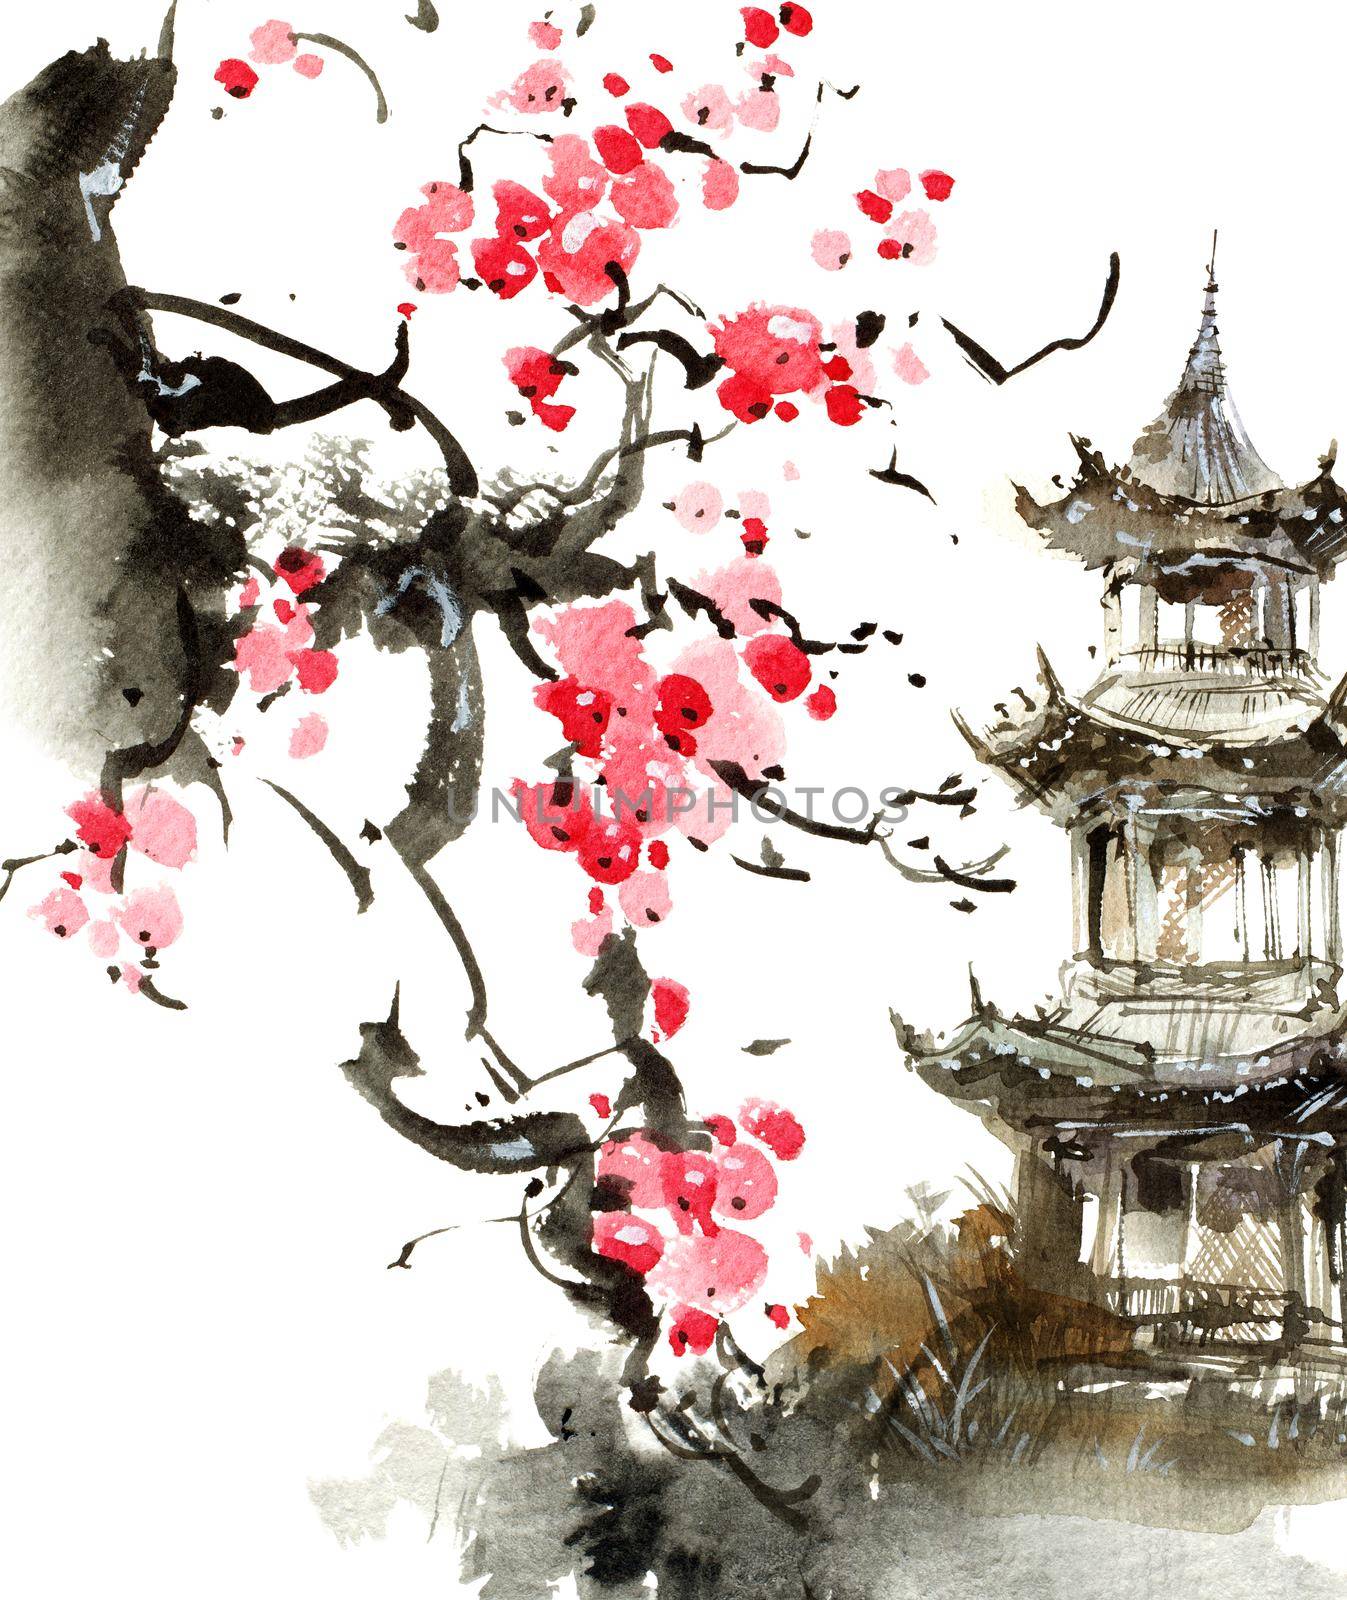 Watercolor and ink illustration of japanese pagoda and blossom sakura tree with pink flowers. Oriental traditional painting by ink and watercolor in sumi-e style.